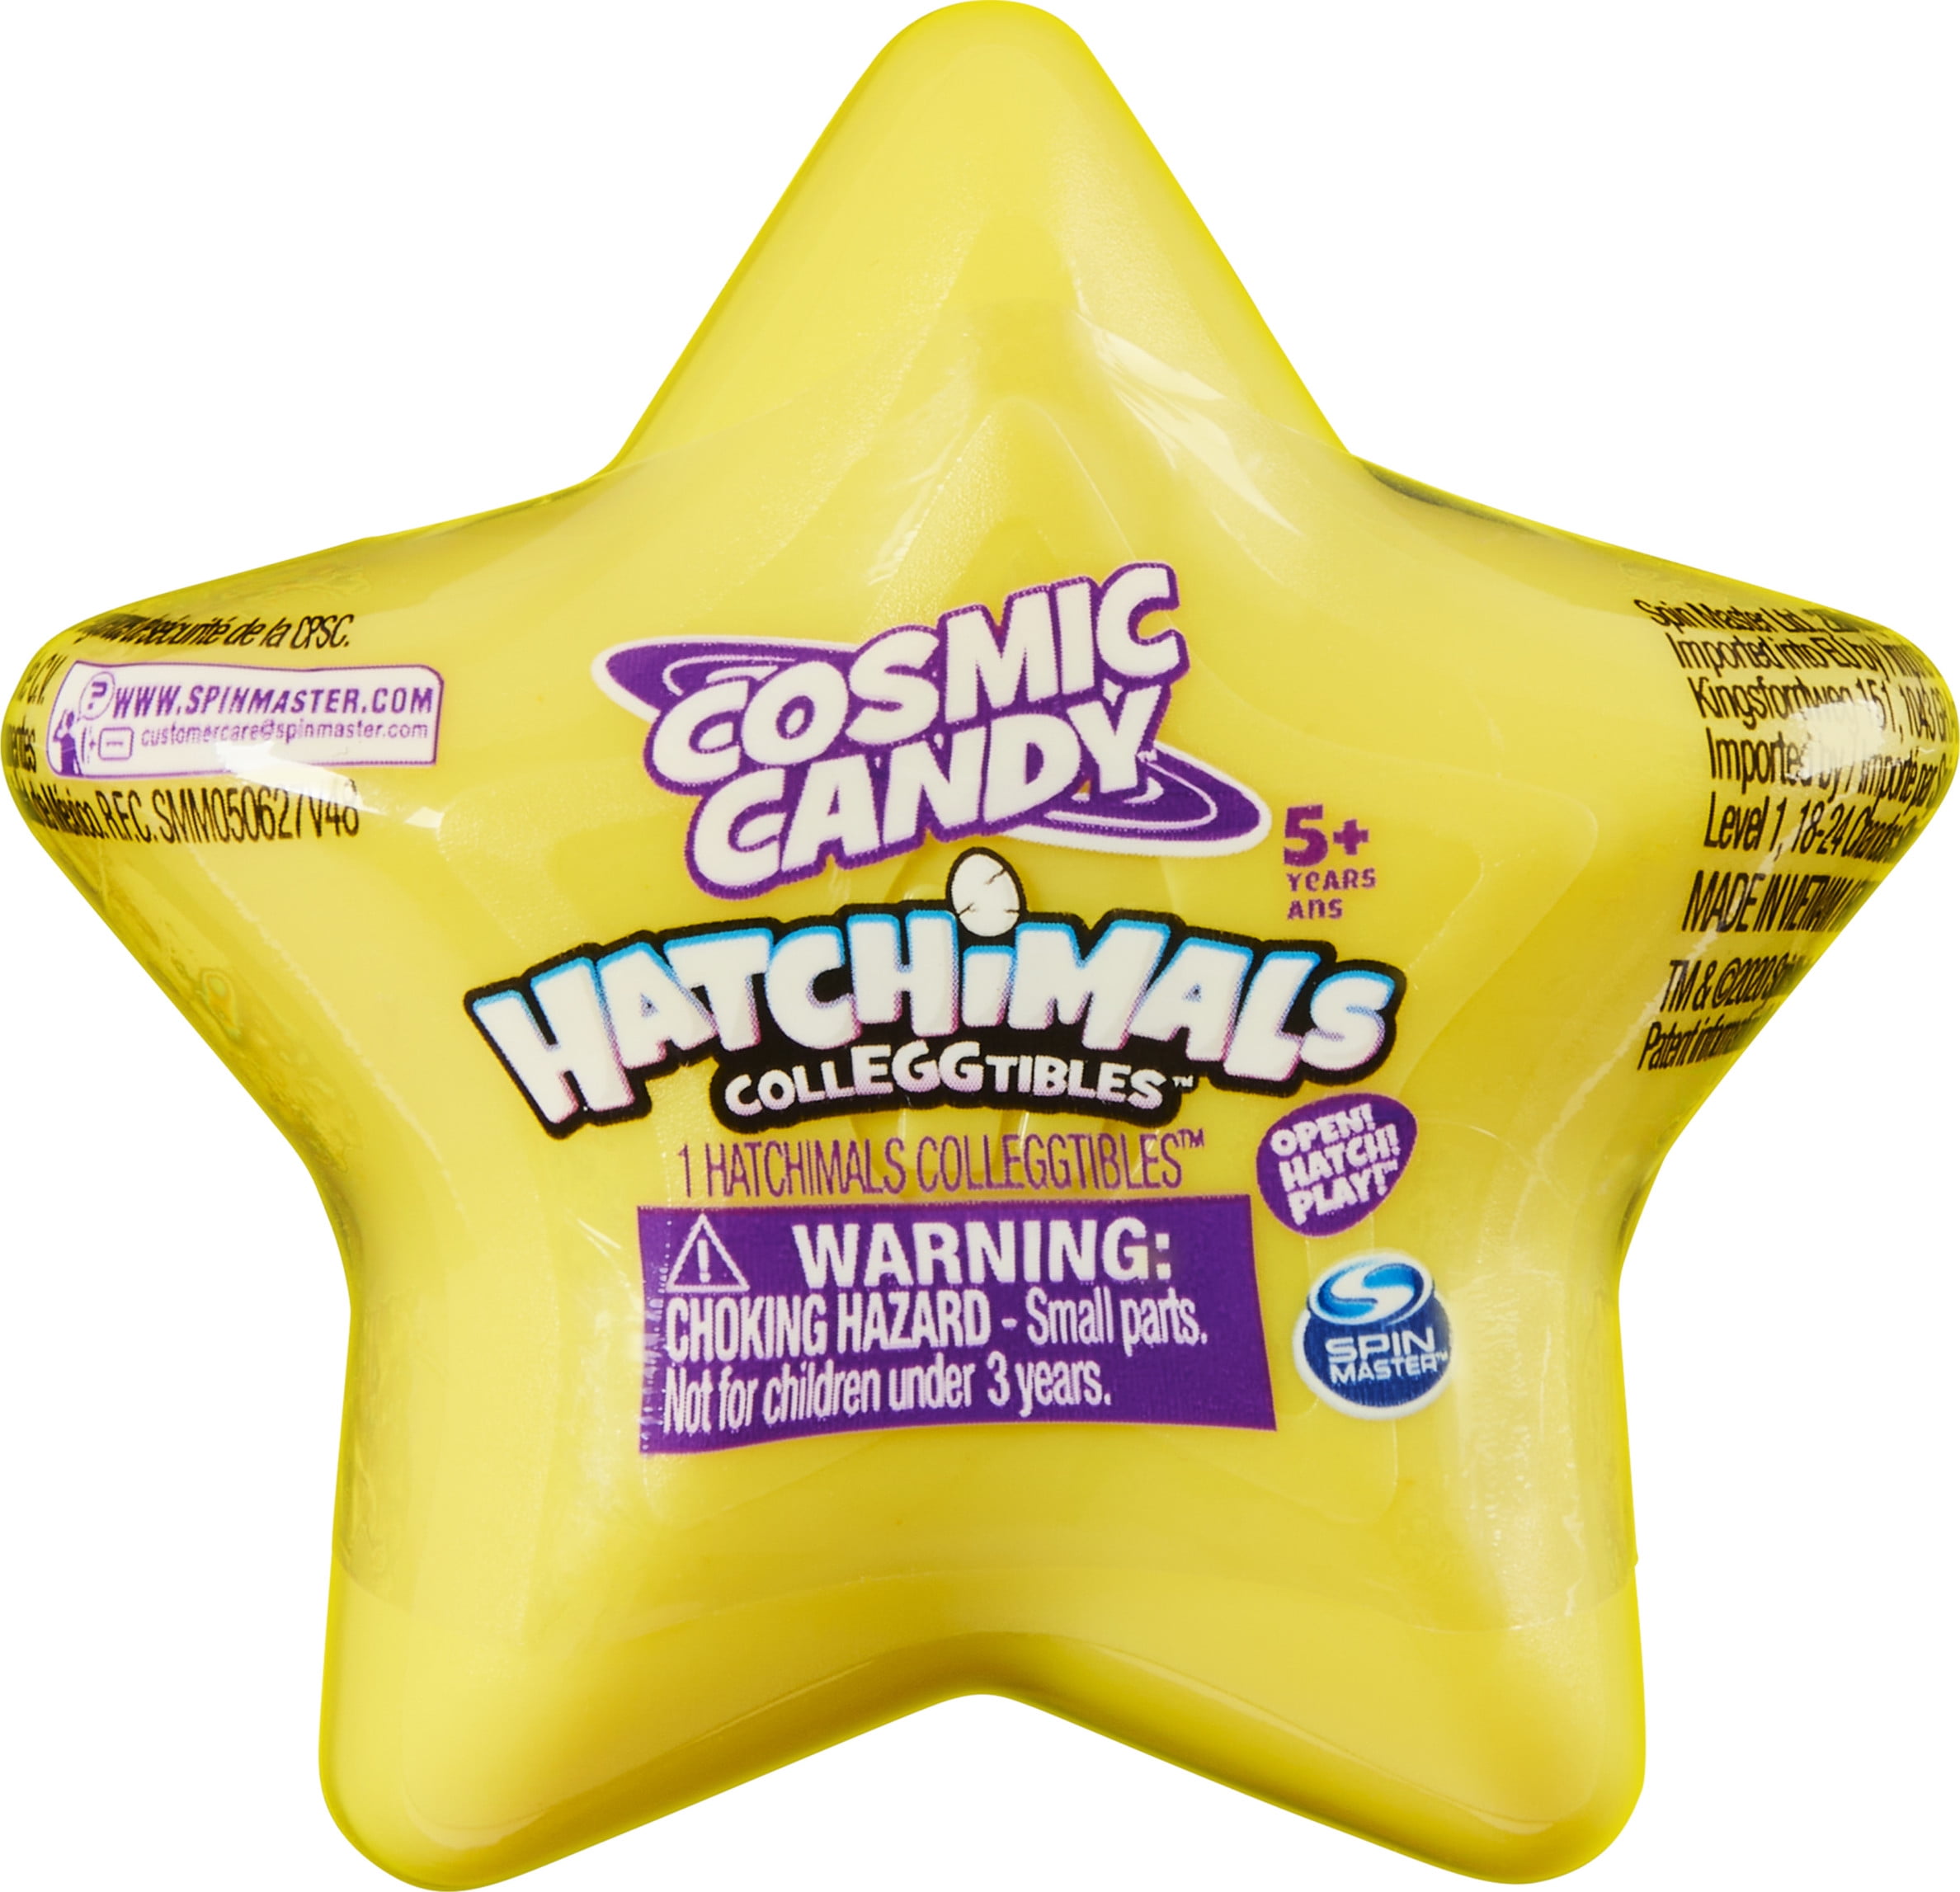 Details about   Cosmic Candy Stars Hatchimals Collectibles Lot Of 7 Blind Bags 